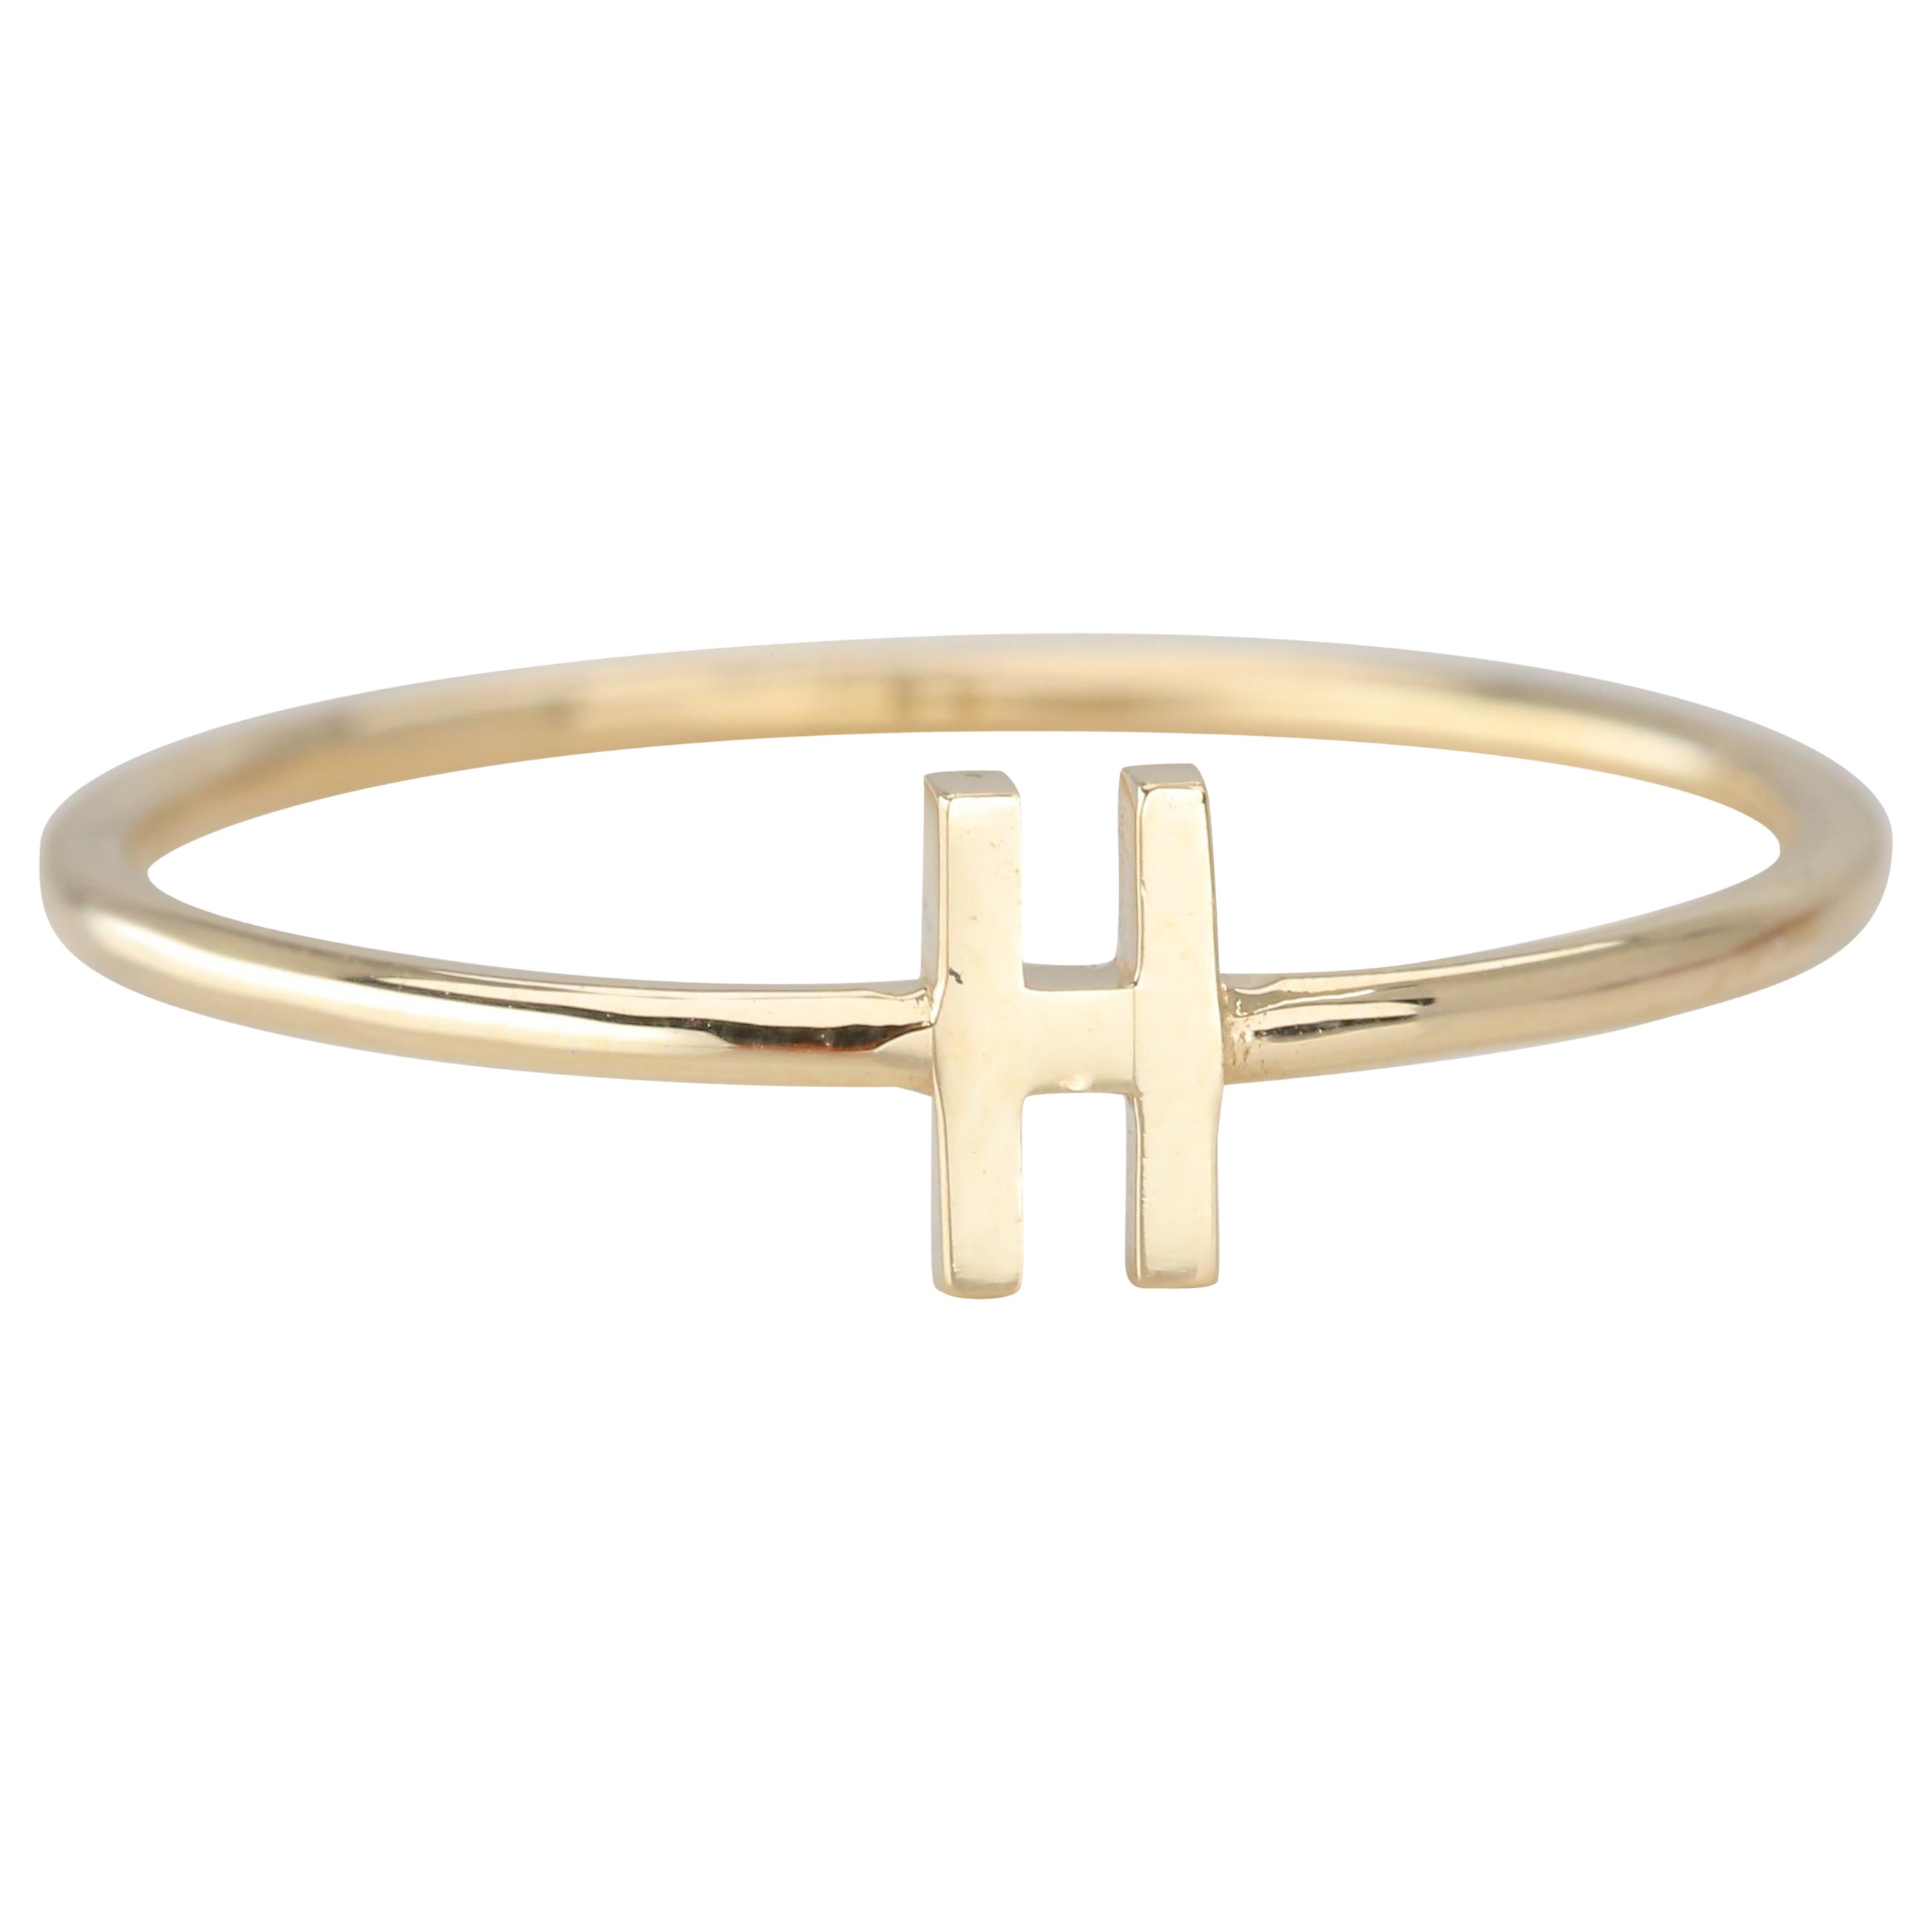 For Sale:  14K Gold Initial H Letter Ring, Personalized Initial Letter Ring